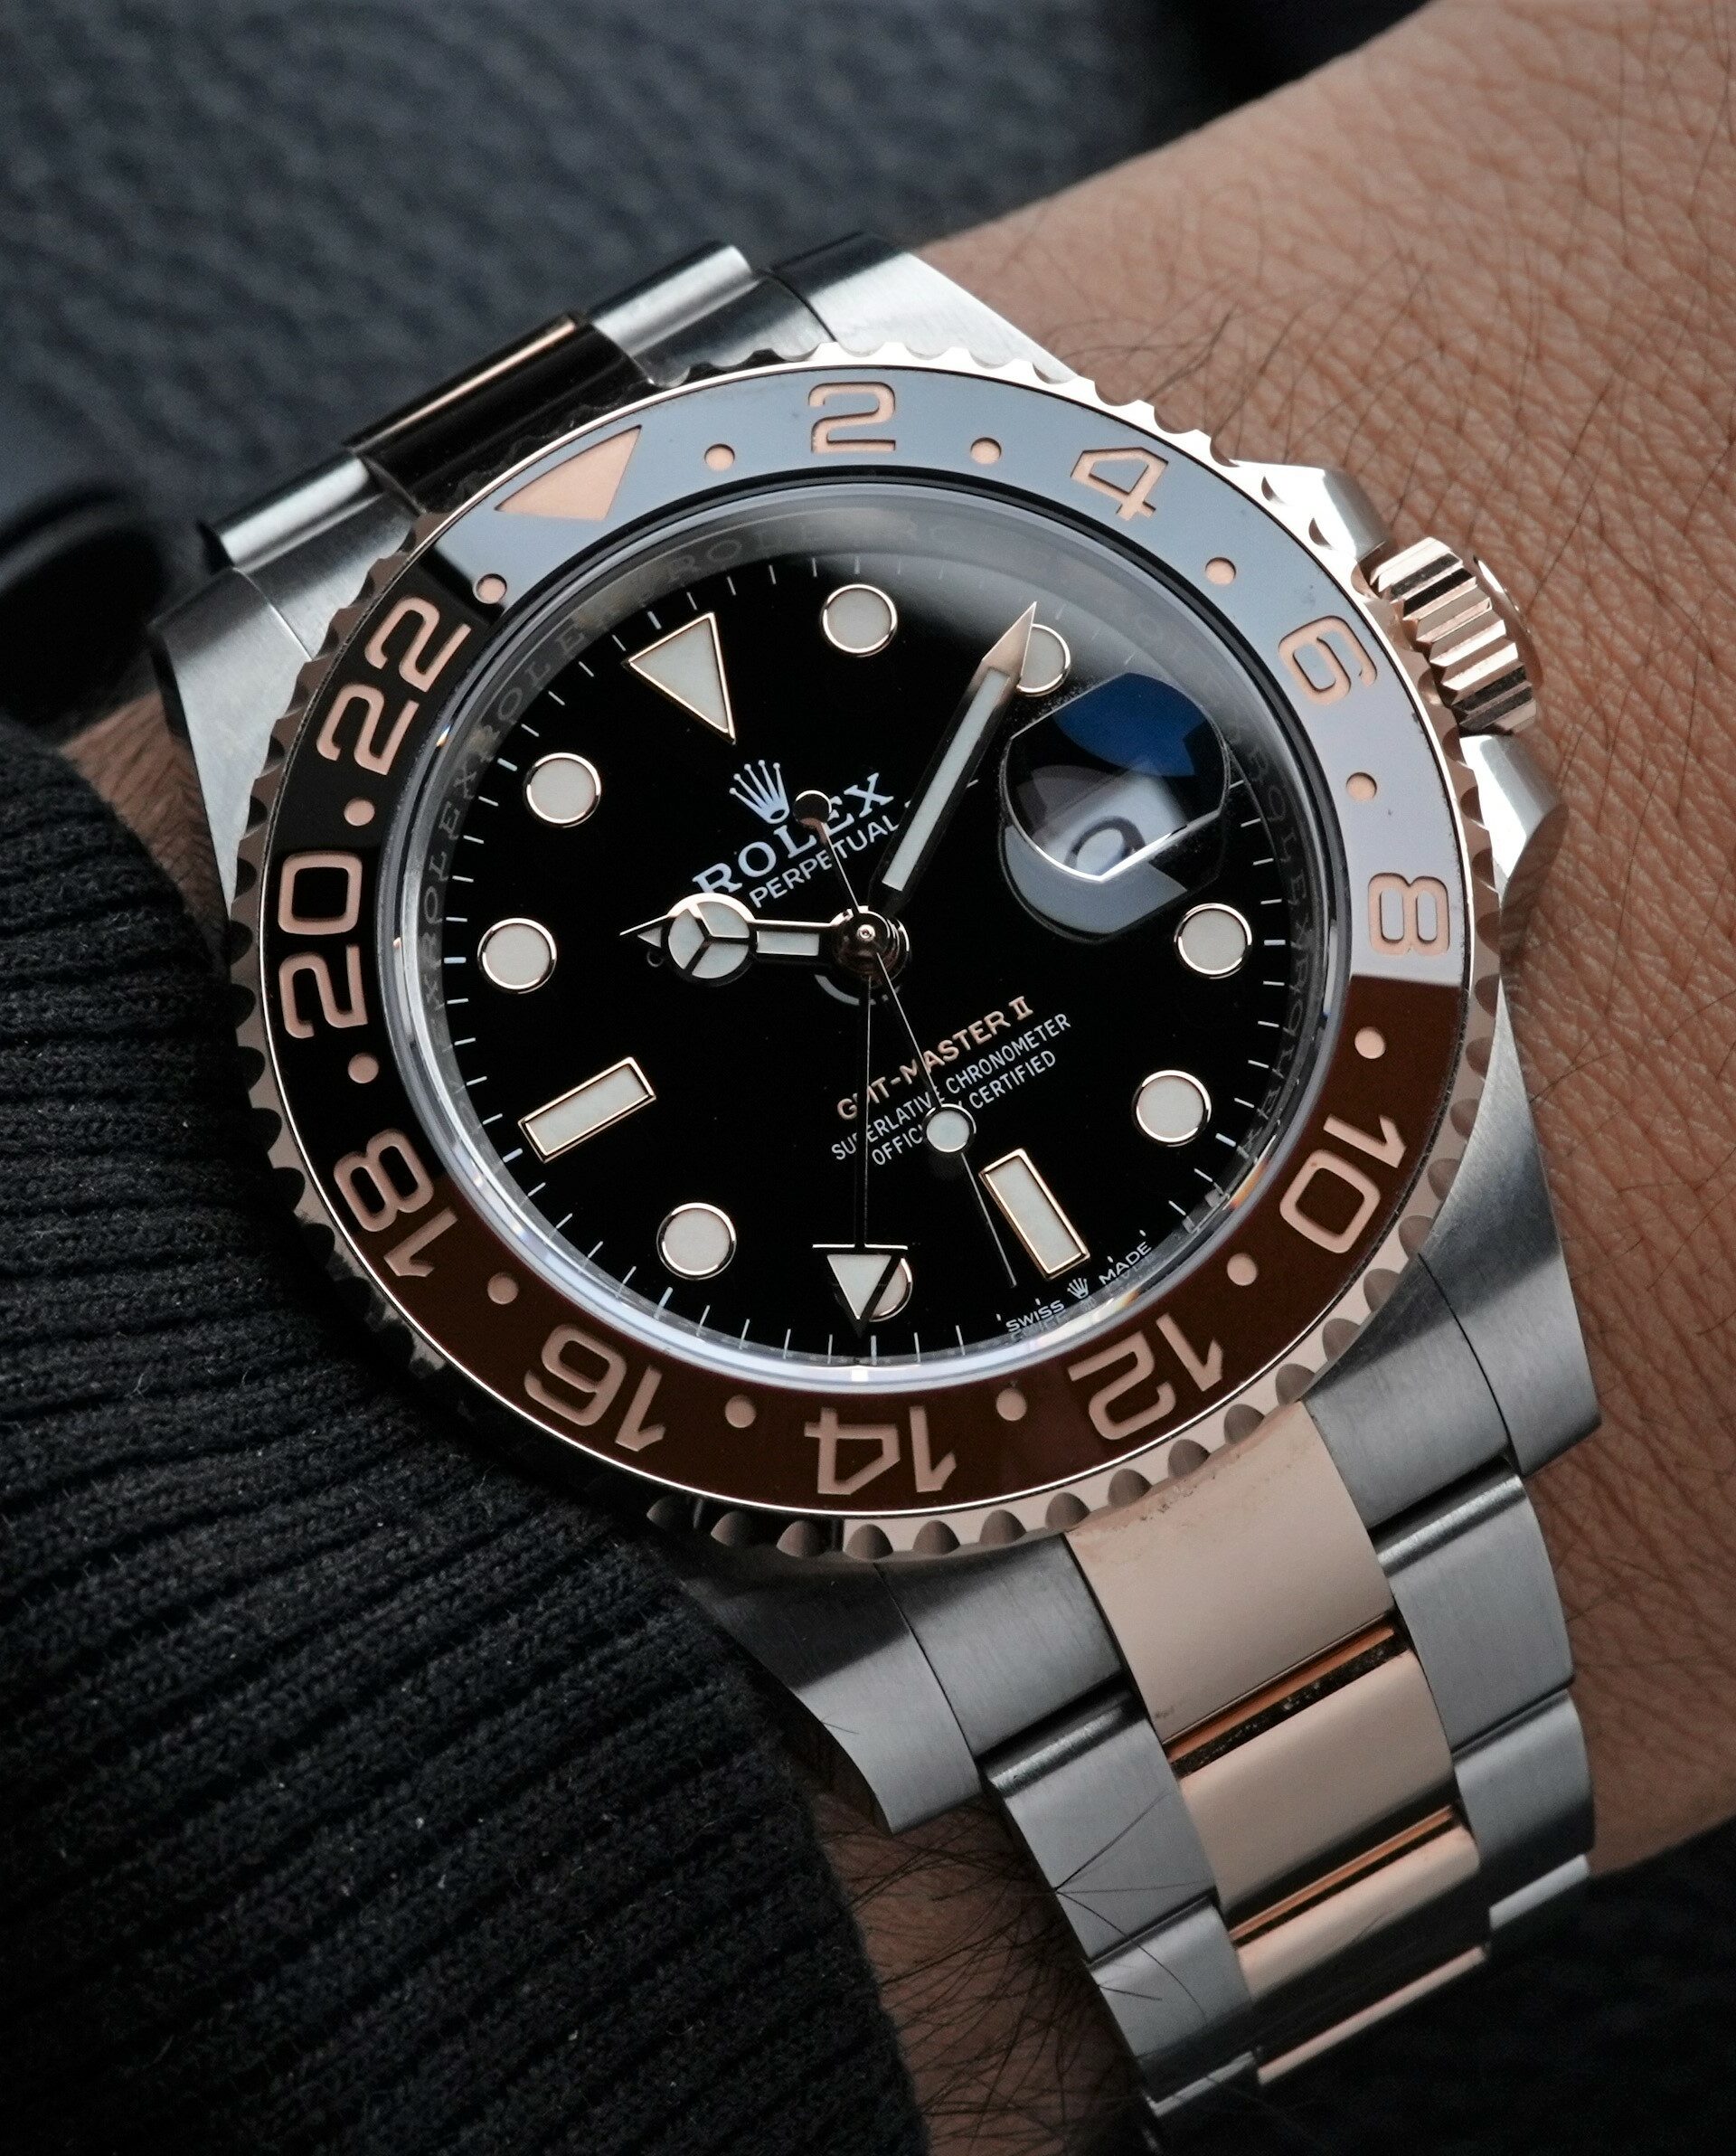 Rolex GMT-Master II Rootbeer Ceramic watch on the wrist.